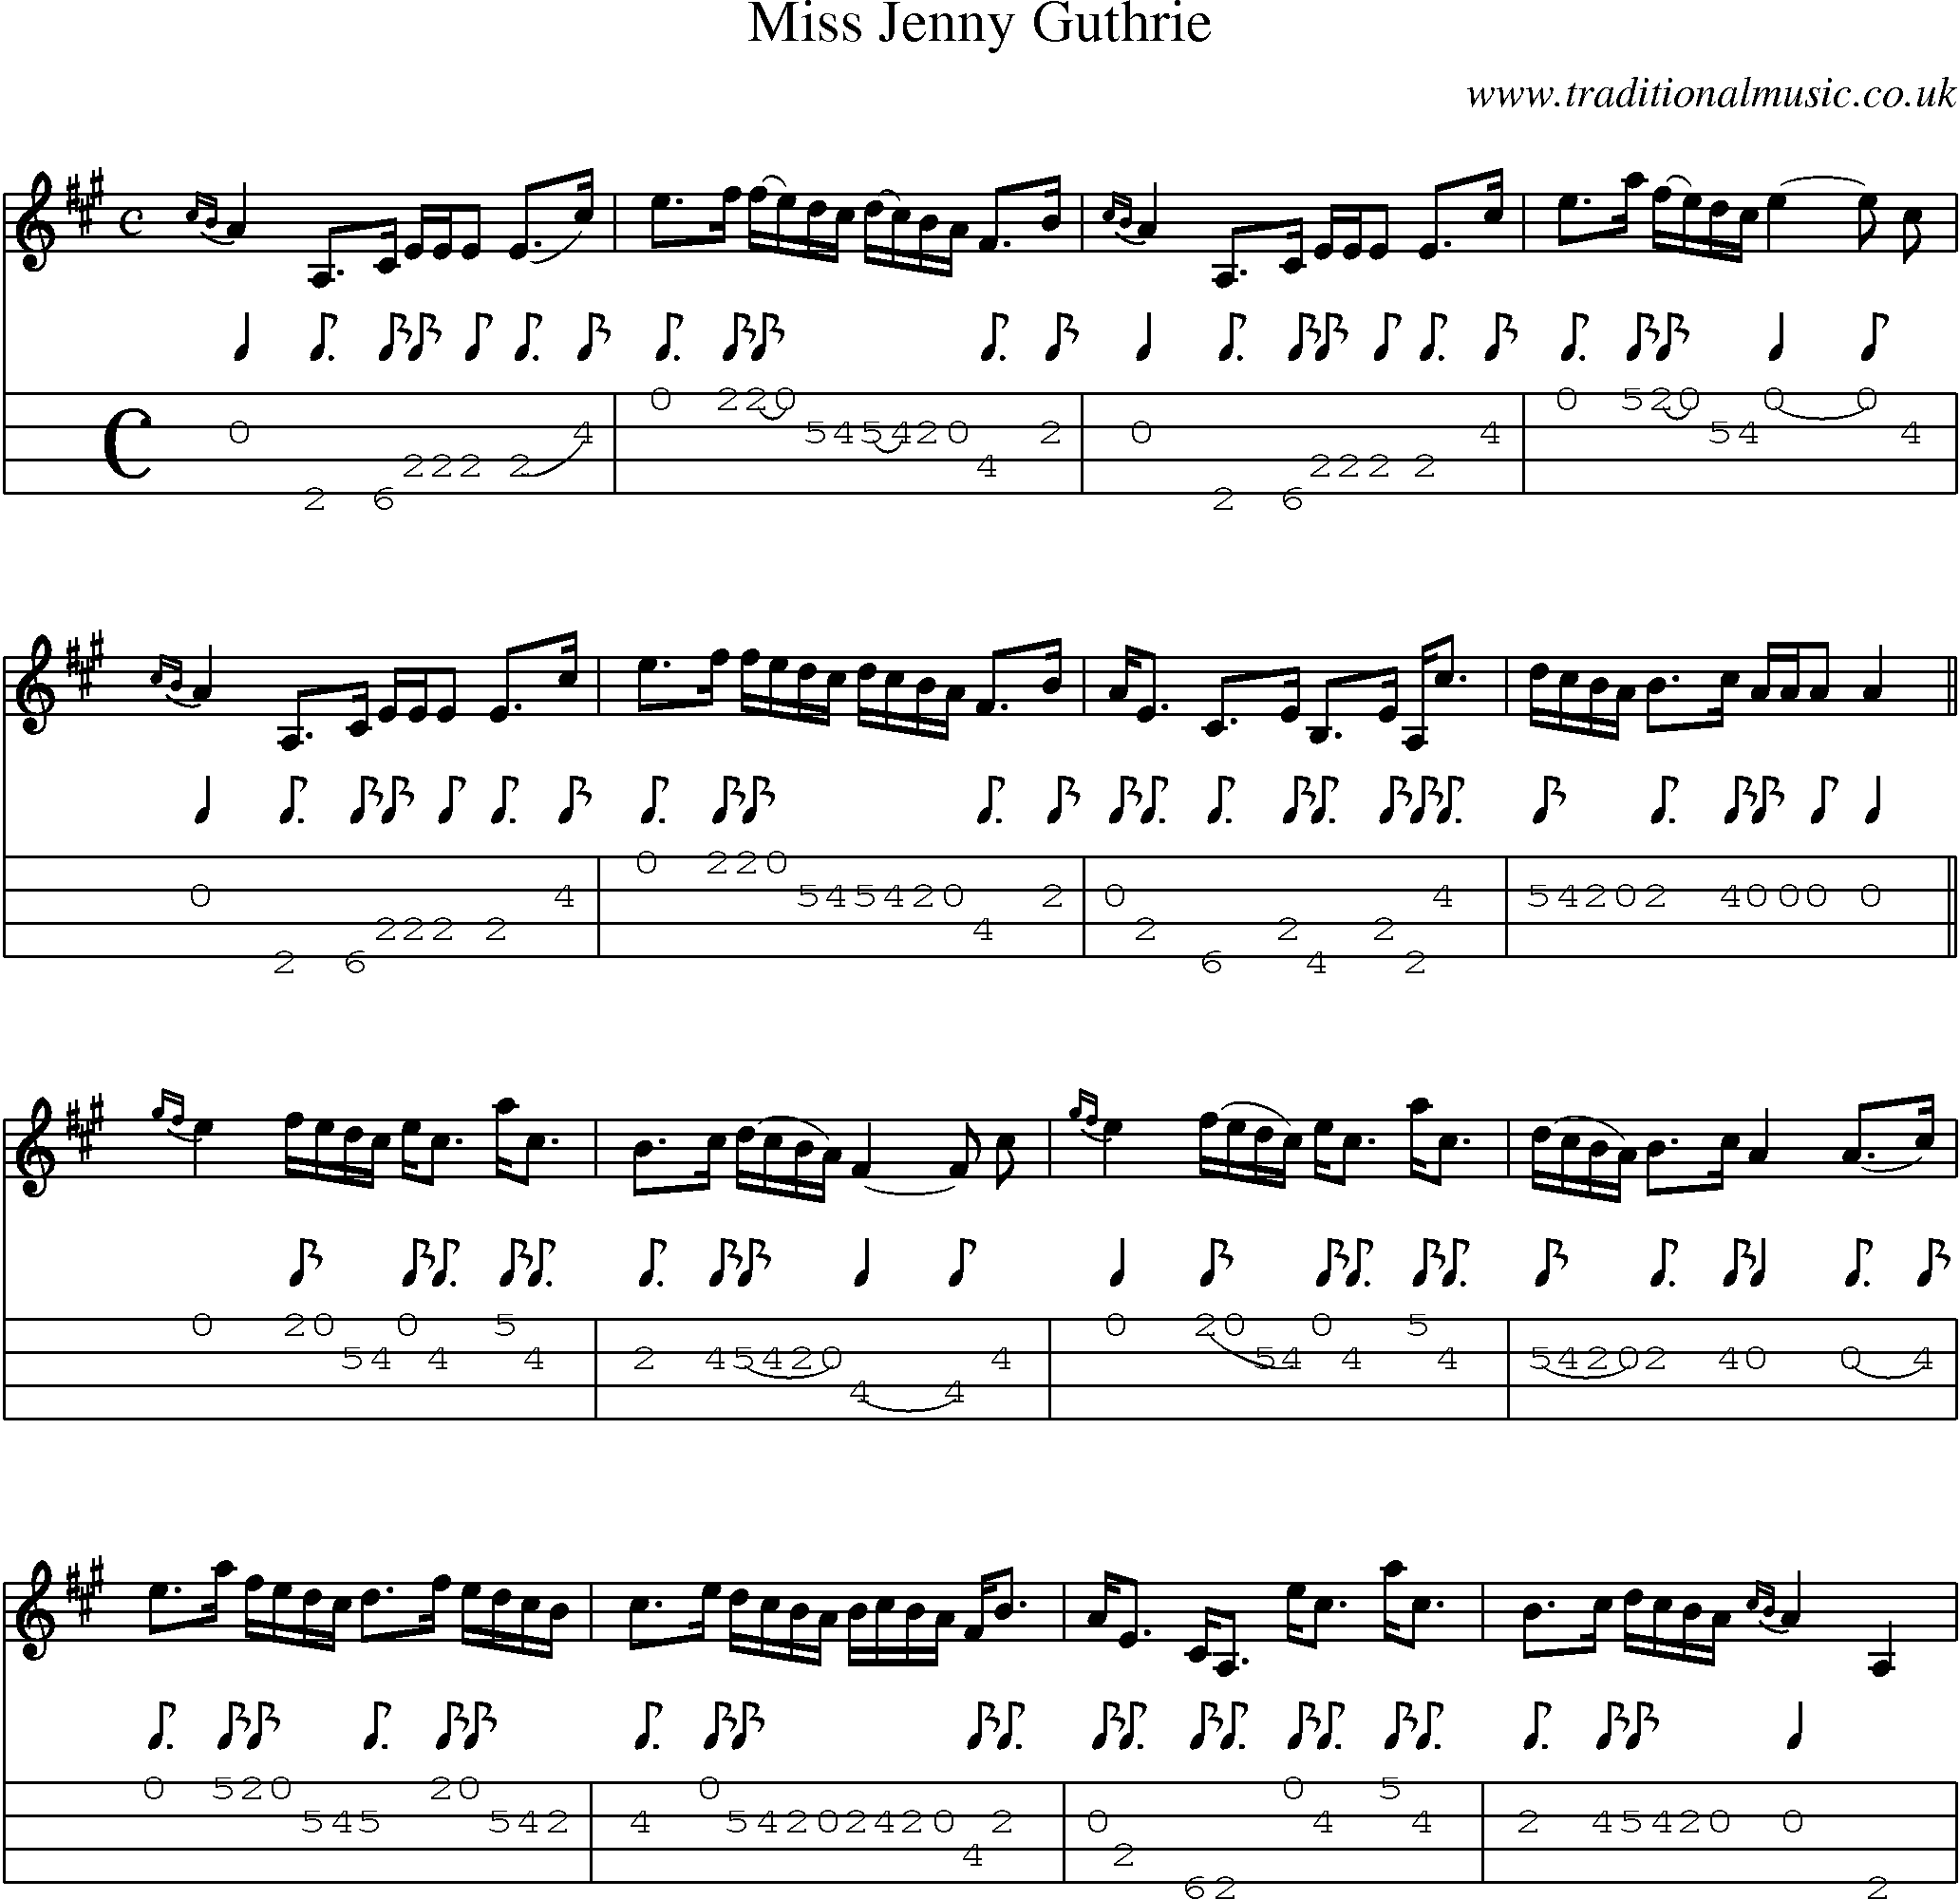 Music Score and Mandolin Tabs for Miss Jenny Guthrie